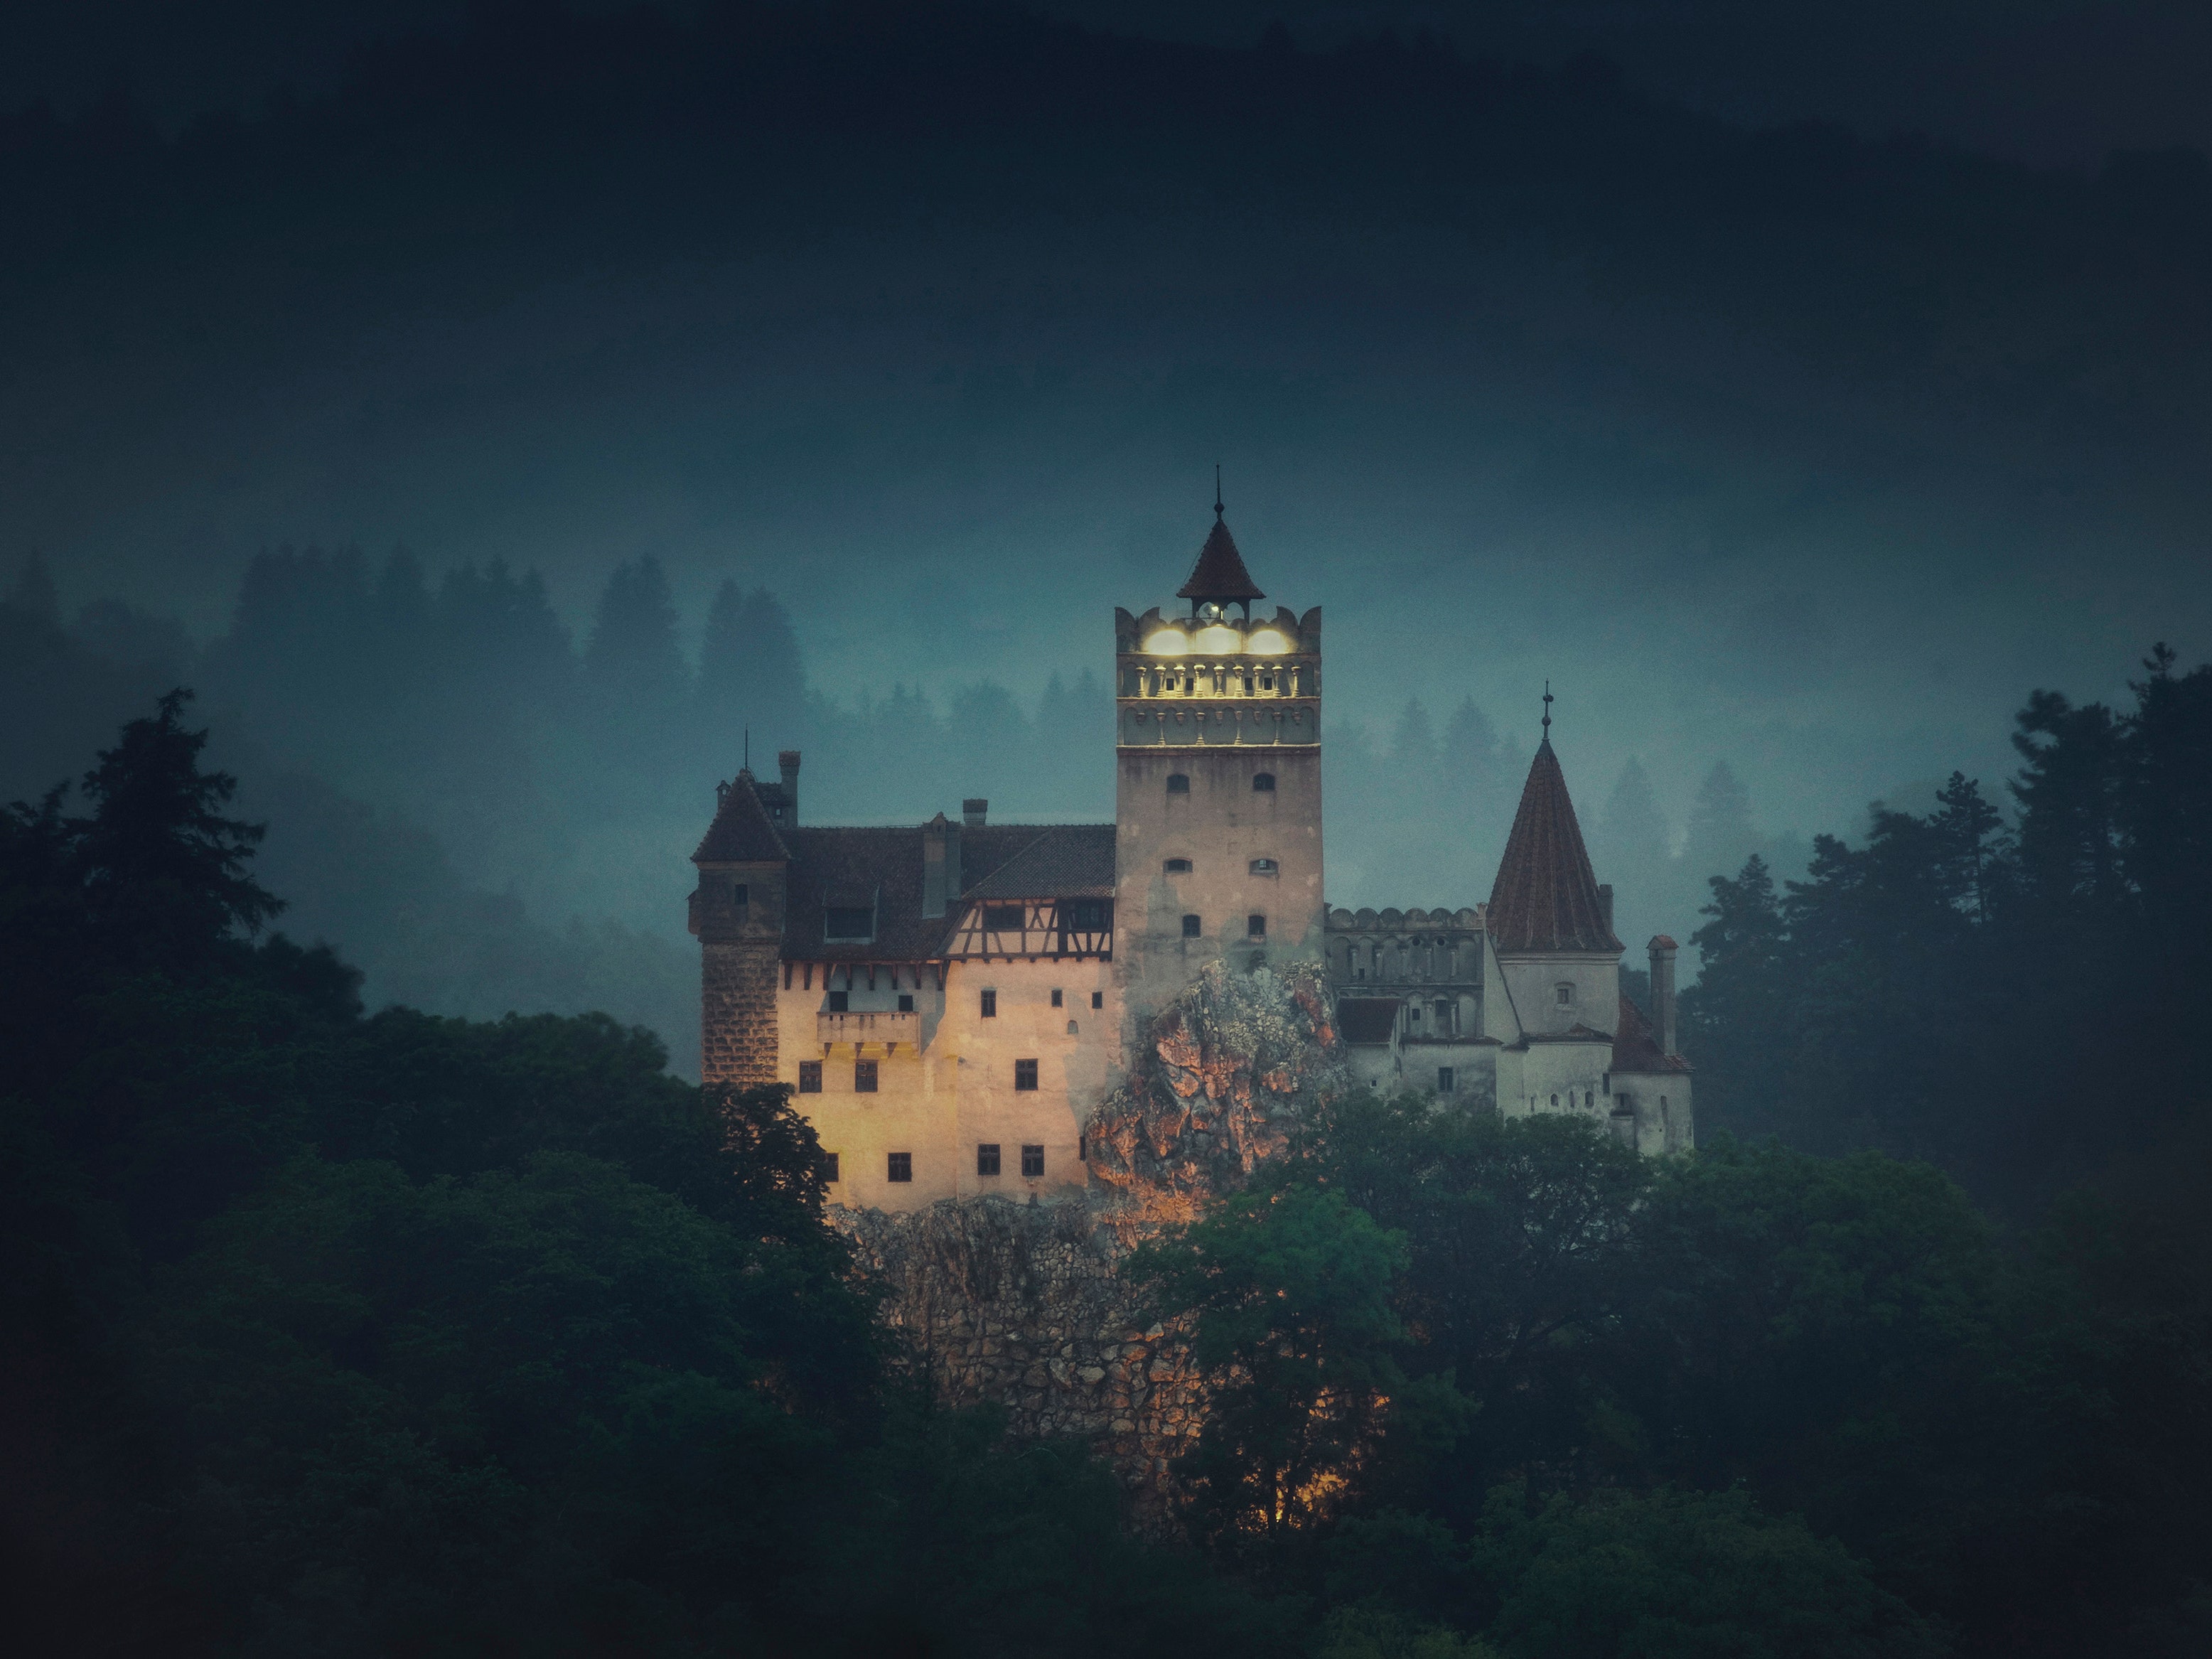 Would You Spend Halloween Night at Dracula's Castle?